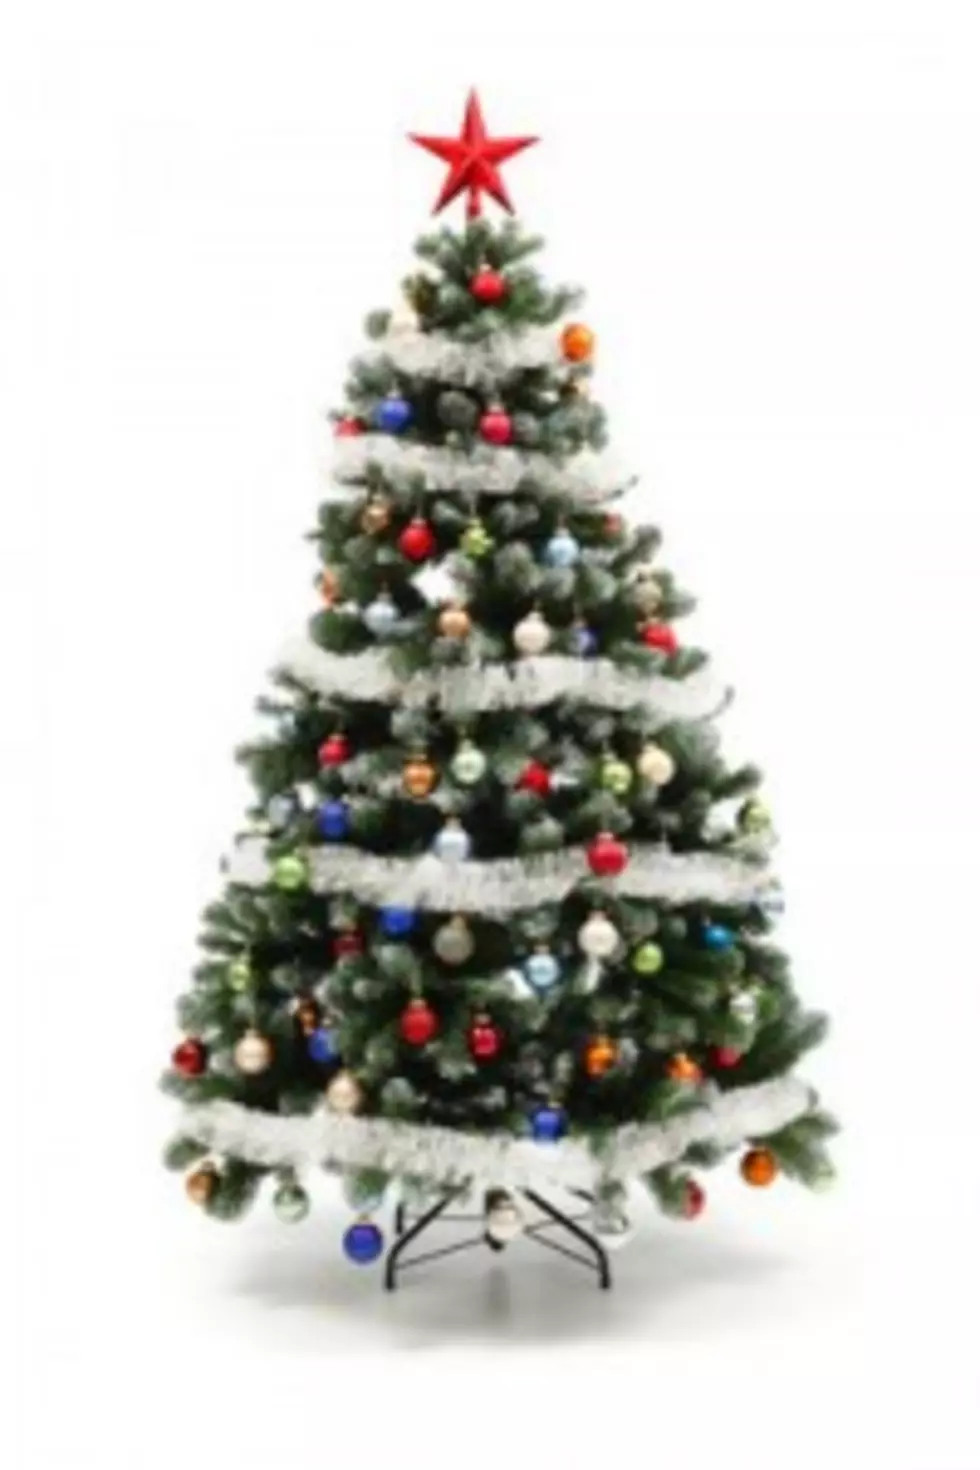 Submit Your Christmas Tree At The Festival of Trees